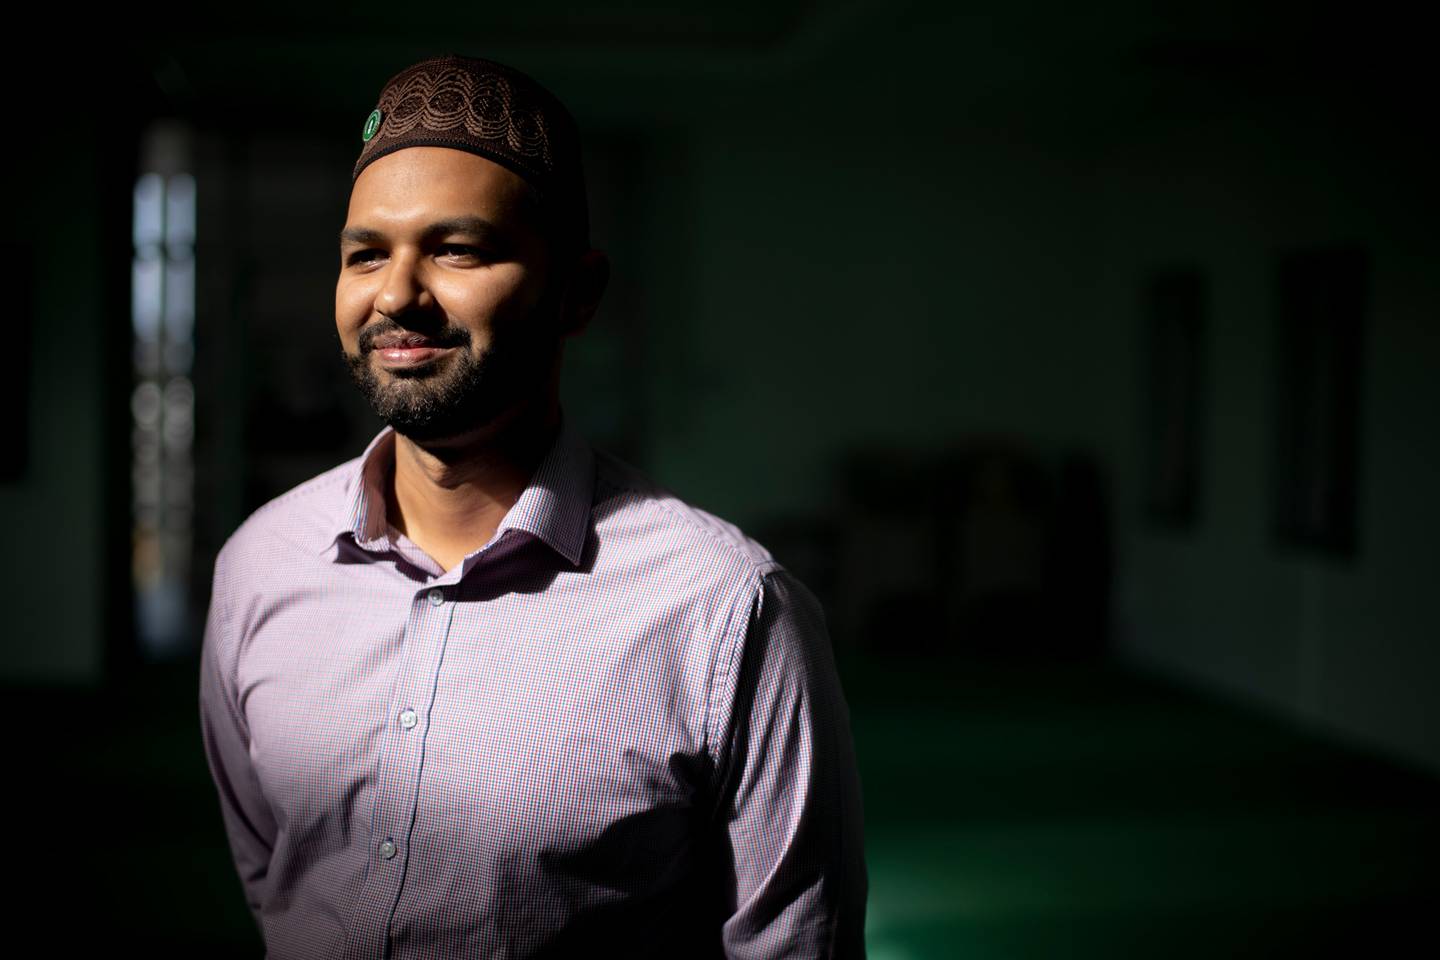 Azeem Zafarullah moved here as a refugee after threats were made against his family in Sri Lanka because of their Ahmaddiya faith. Photo / Dean Purcell